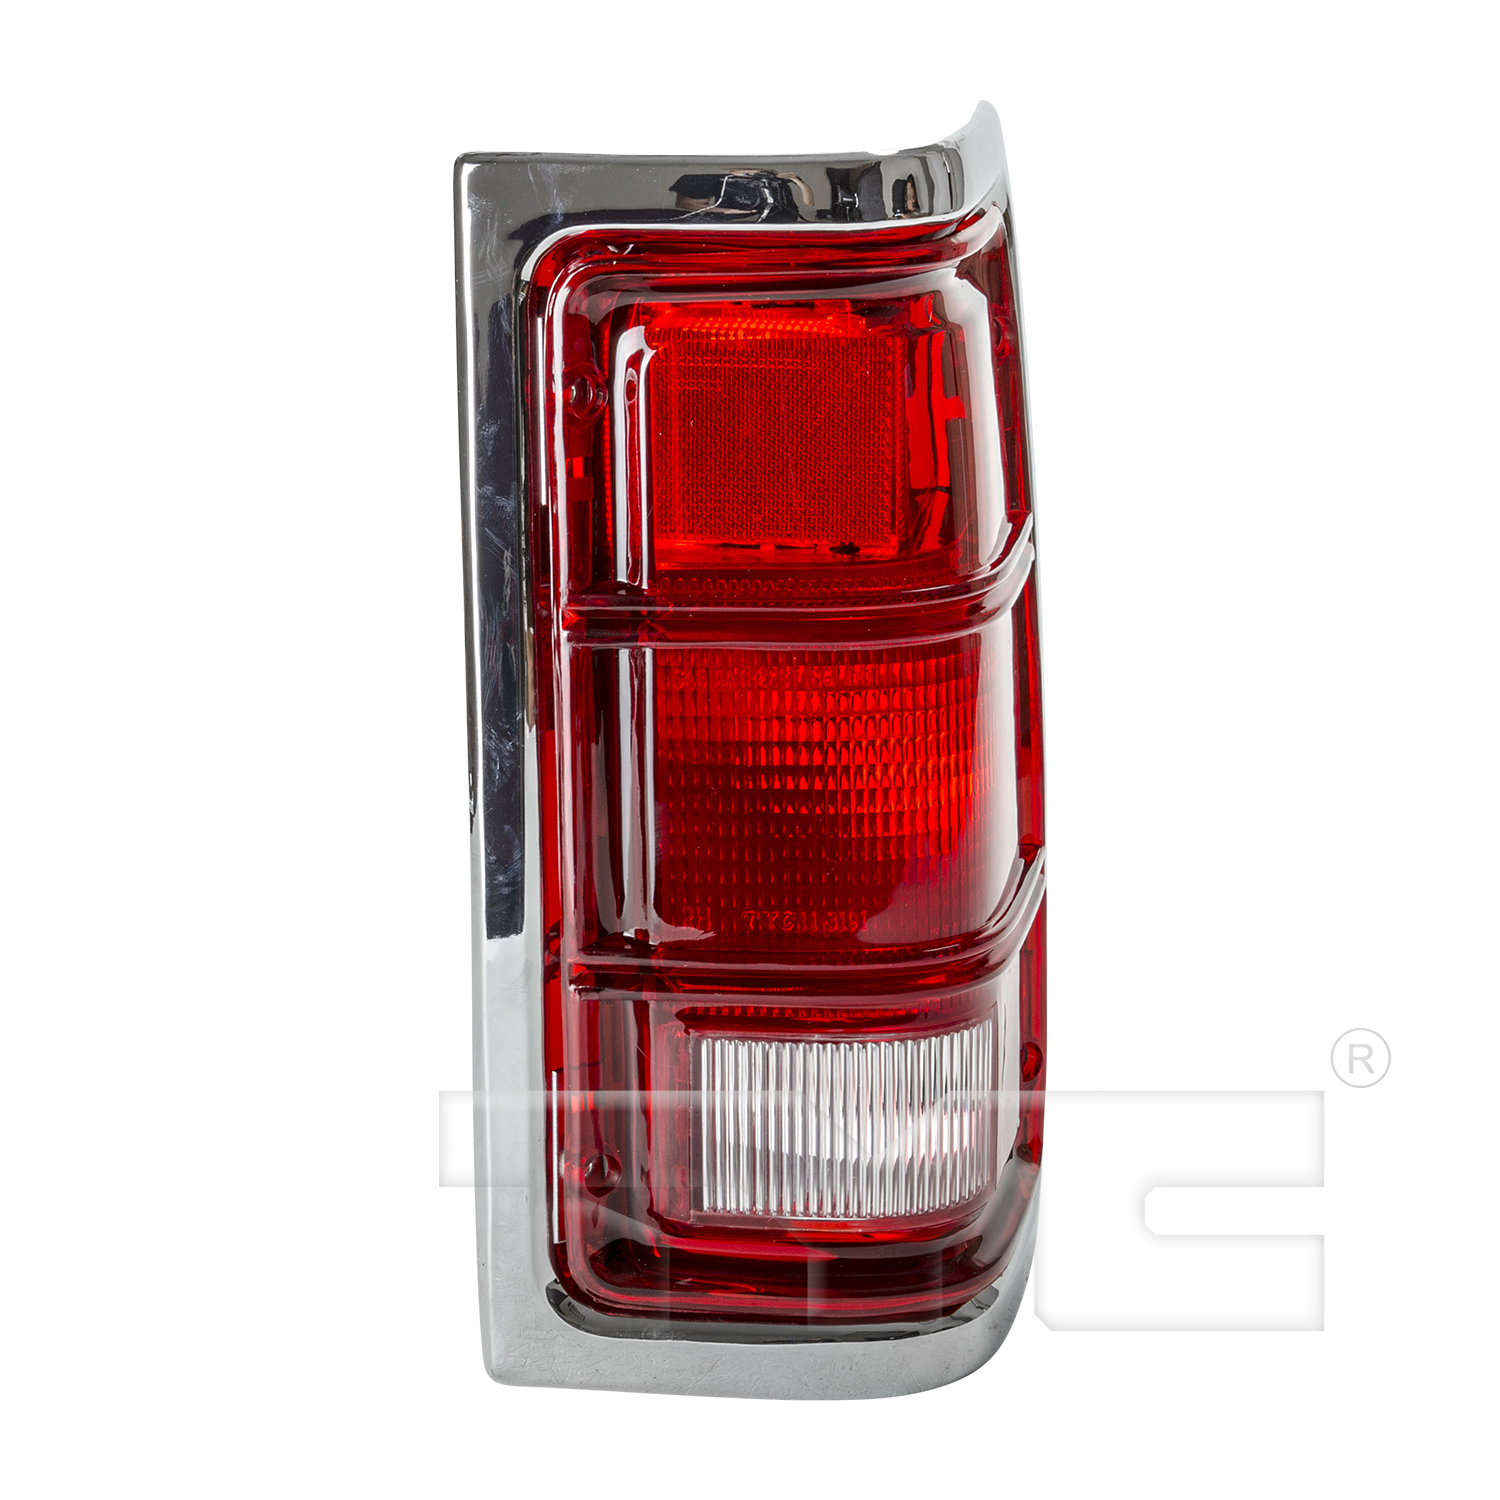 Aftermarket TAILLIGHTS for DODGE - W150, W150,92-93,RT Taillamp lens